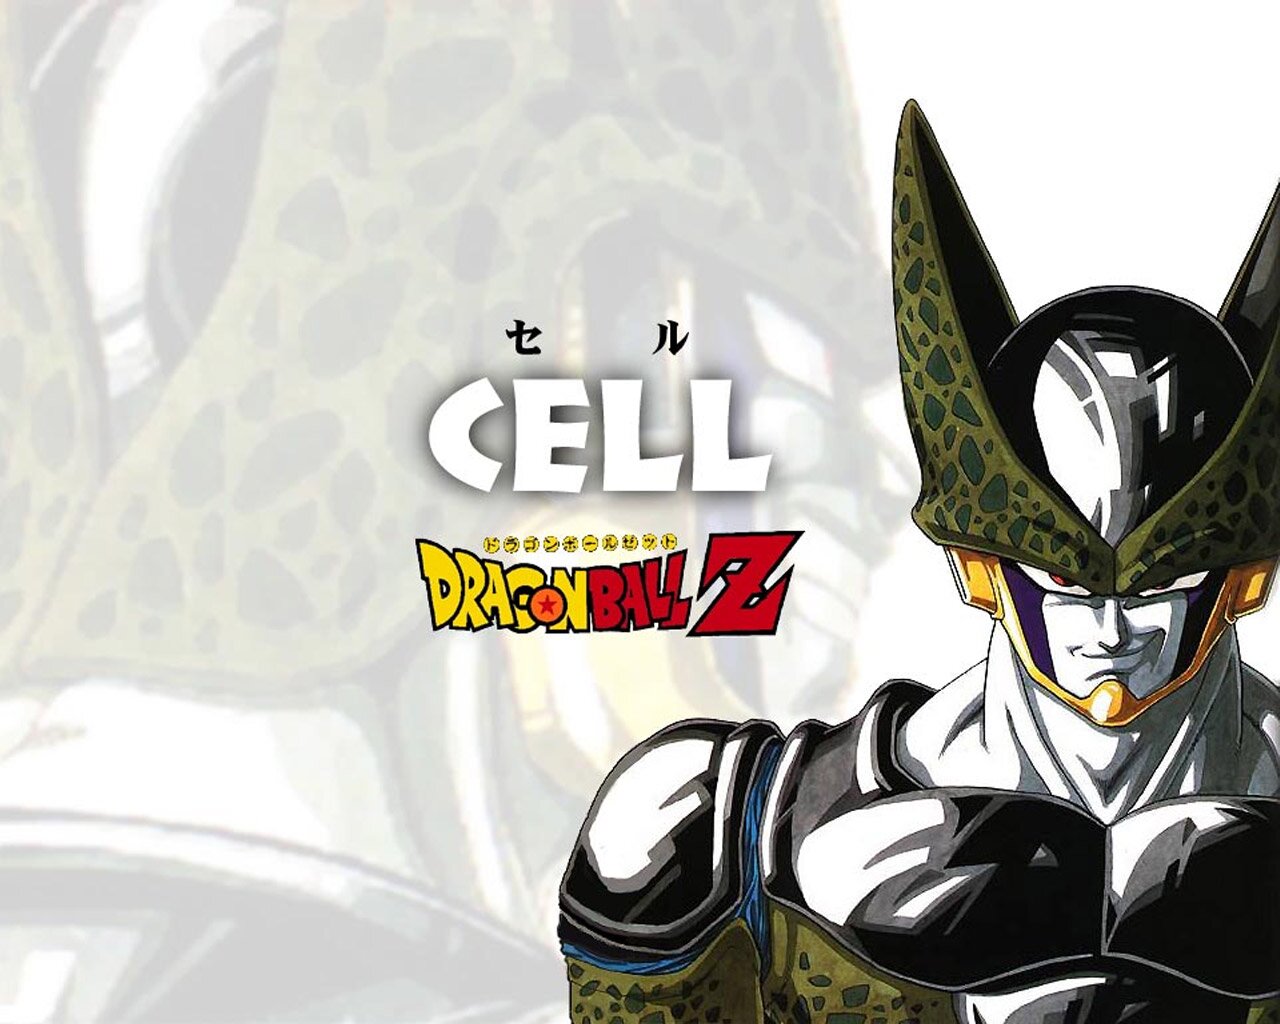 You are viewing the Dragonball Z wallpaper named Cell.